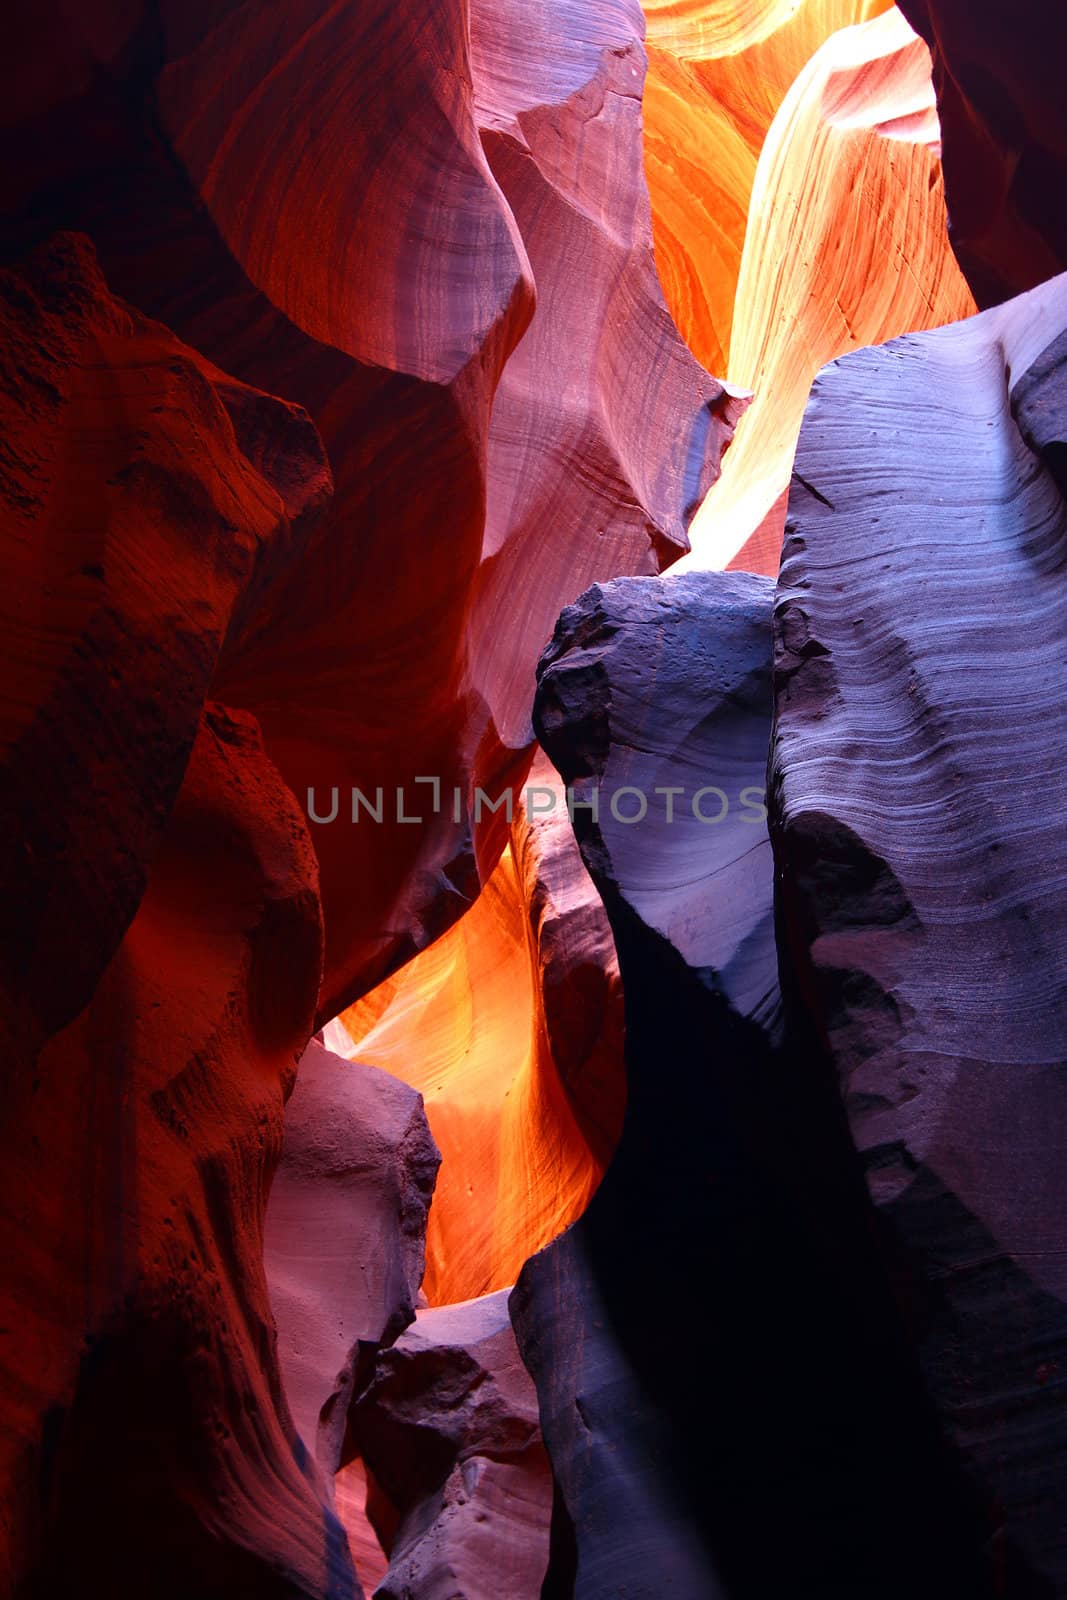 Myriad of colors created through the curved rock walls of Antelope Canyon in Arizona.